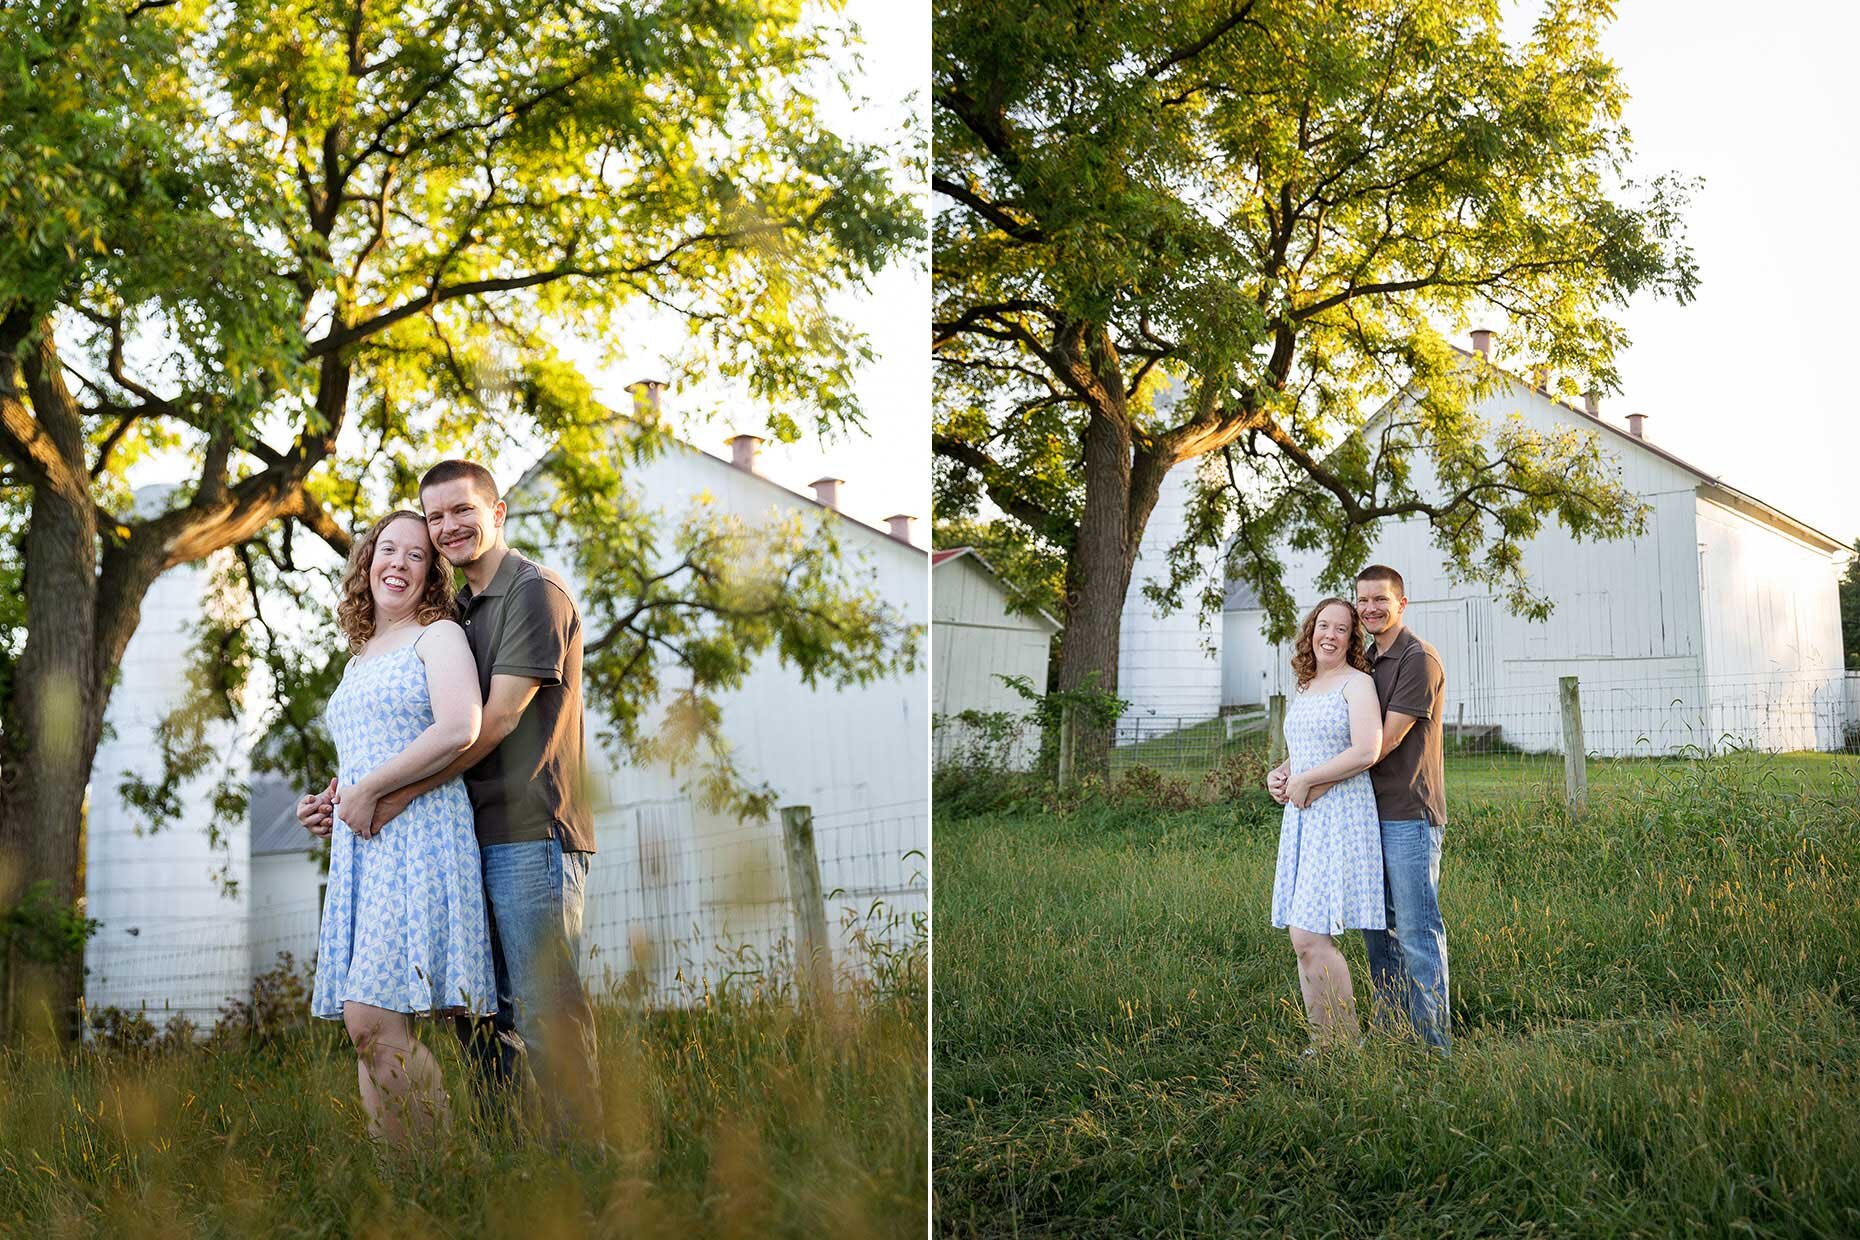 Engagement photos in front of a tree and barn 